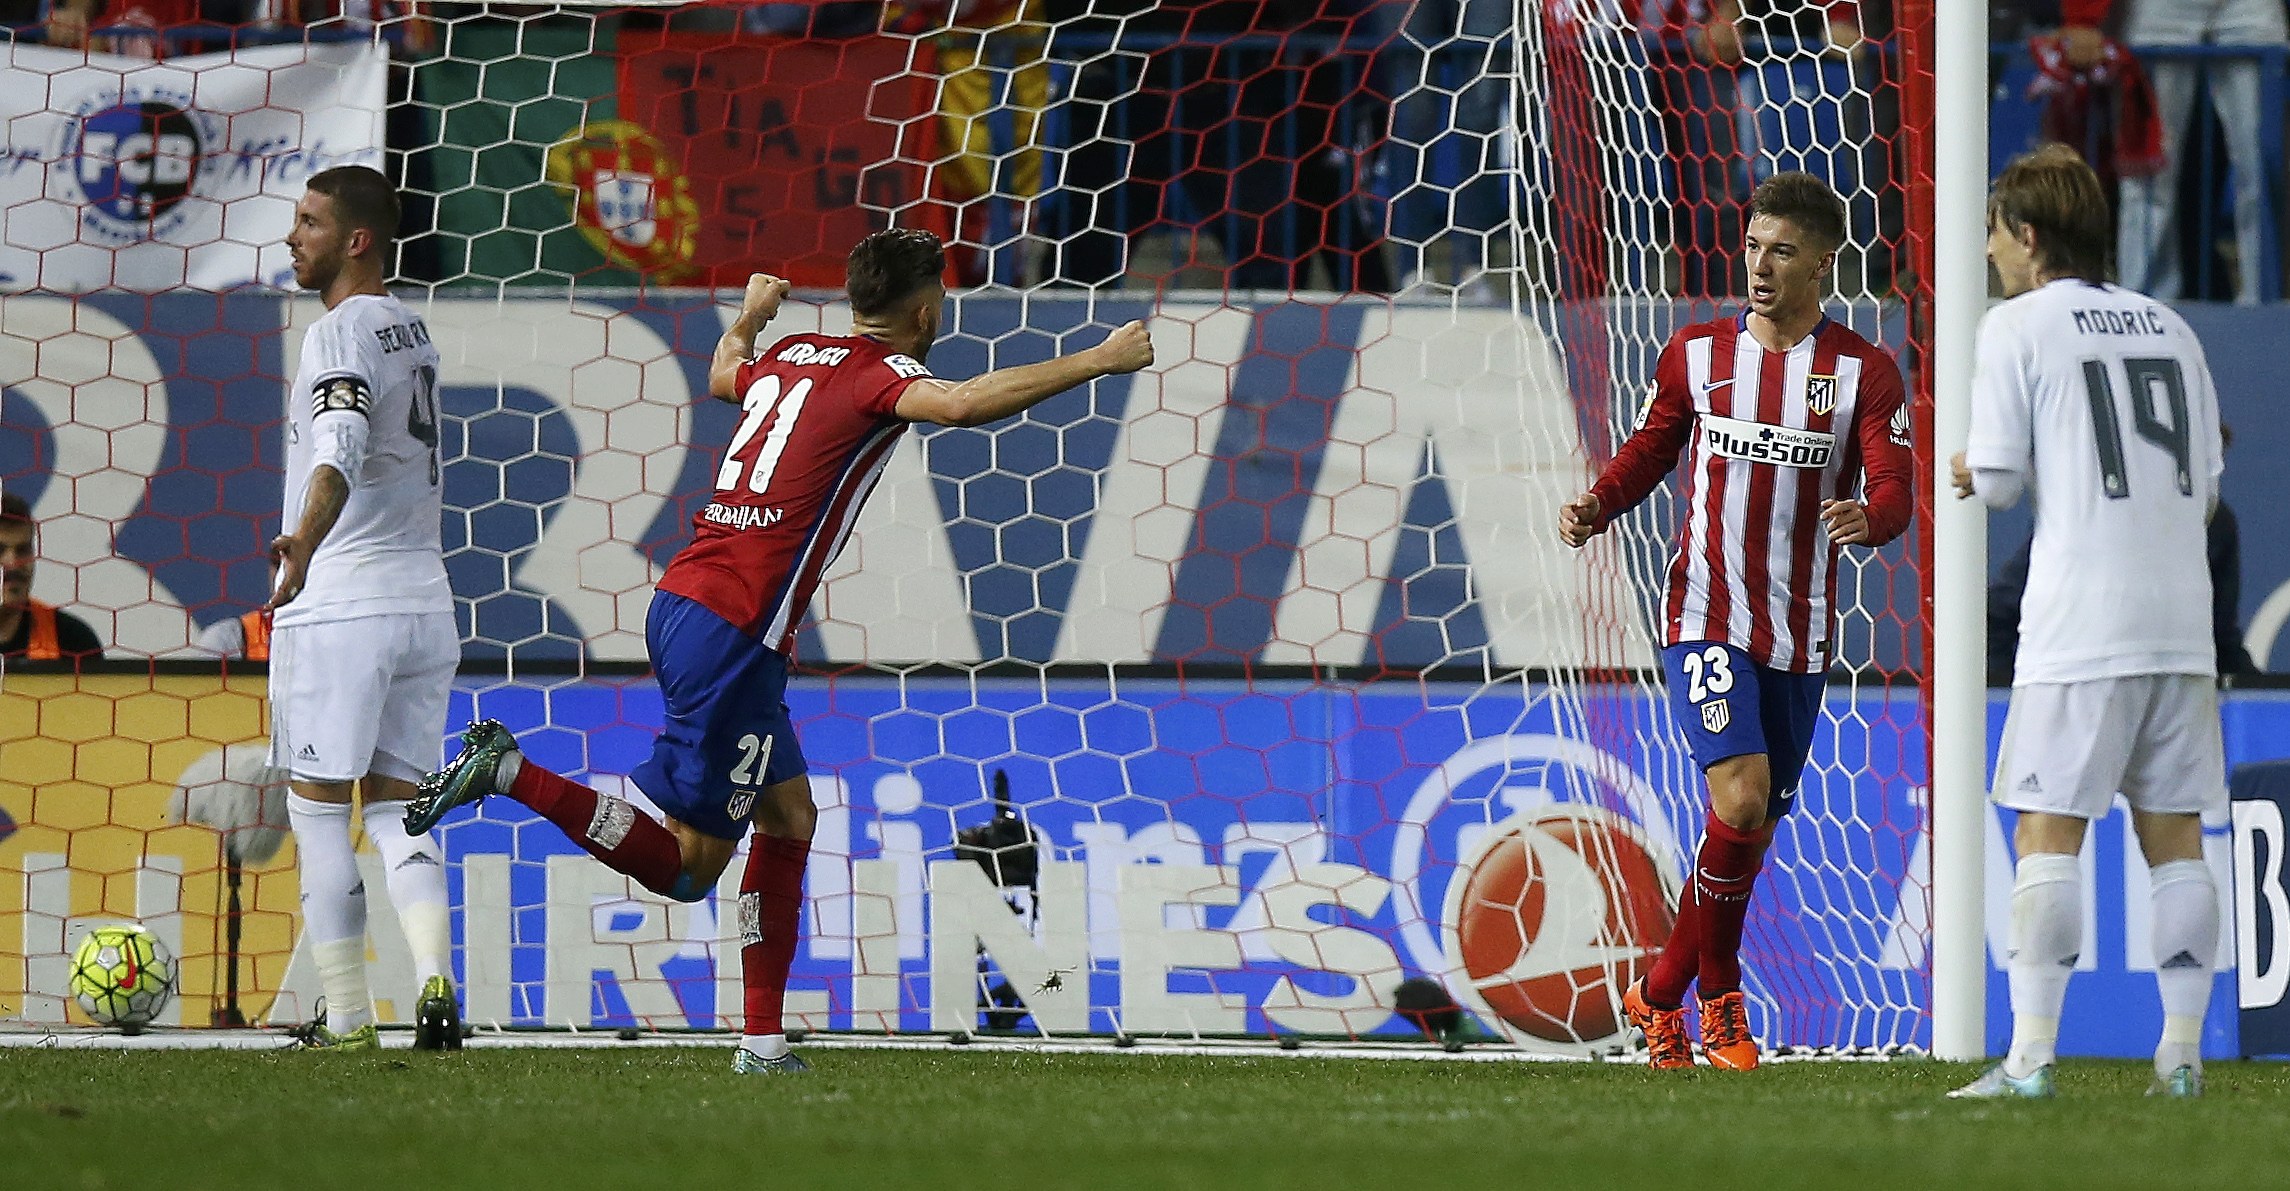 Atletico Madrid's Luciano Vietto (2nd R) celebrates  after scoring a goal during their Spanish first division derby soccer match against Real Madrid at the Vicente Calderon stadium in Madrid, Spain, October 4, 2015.        REUTERS/Sergio Perez